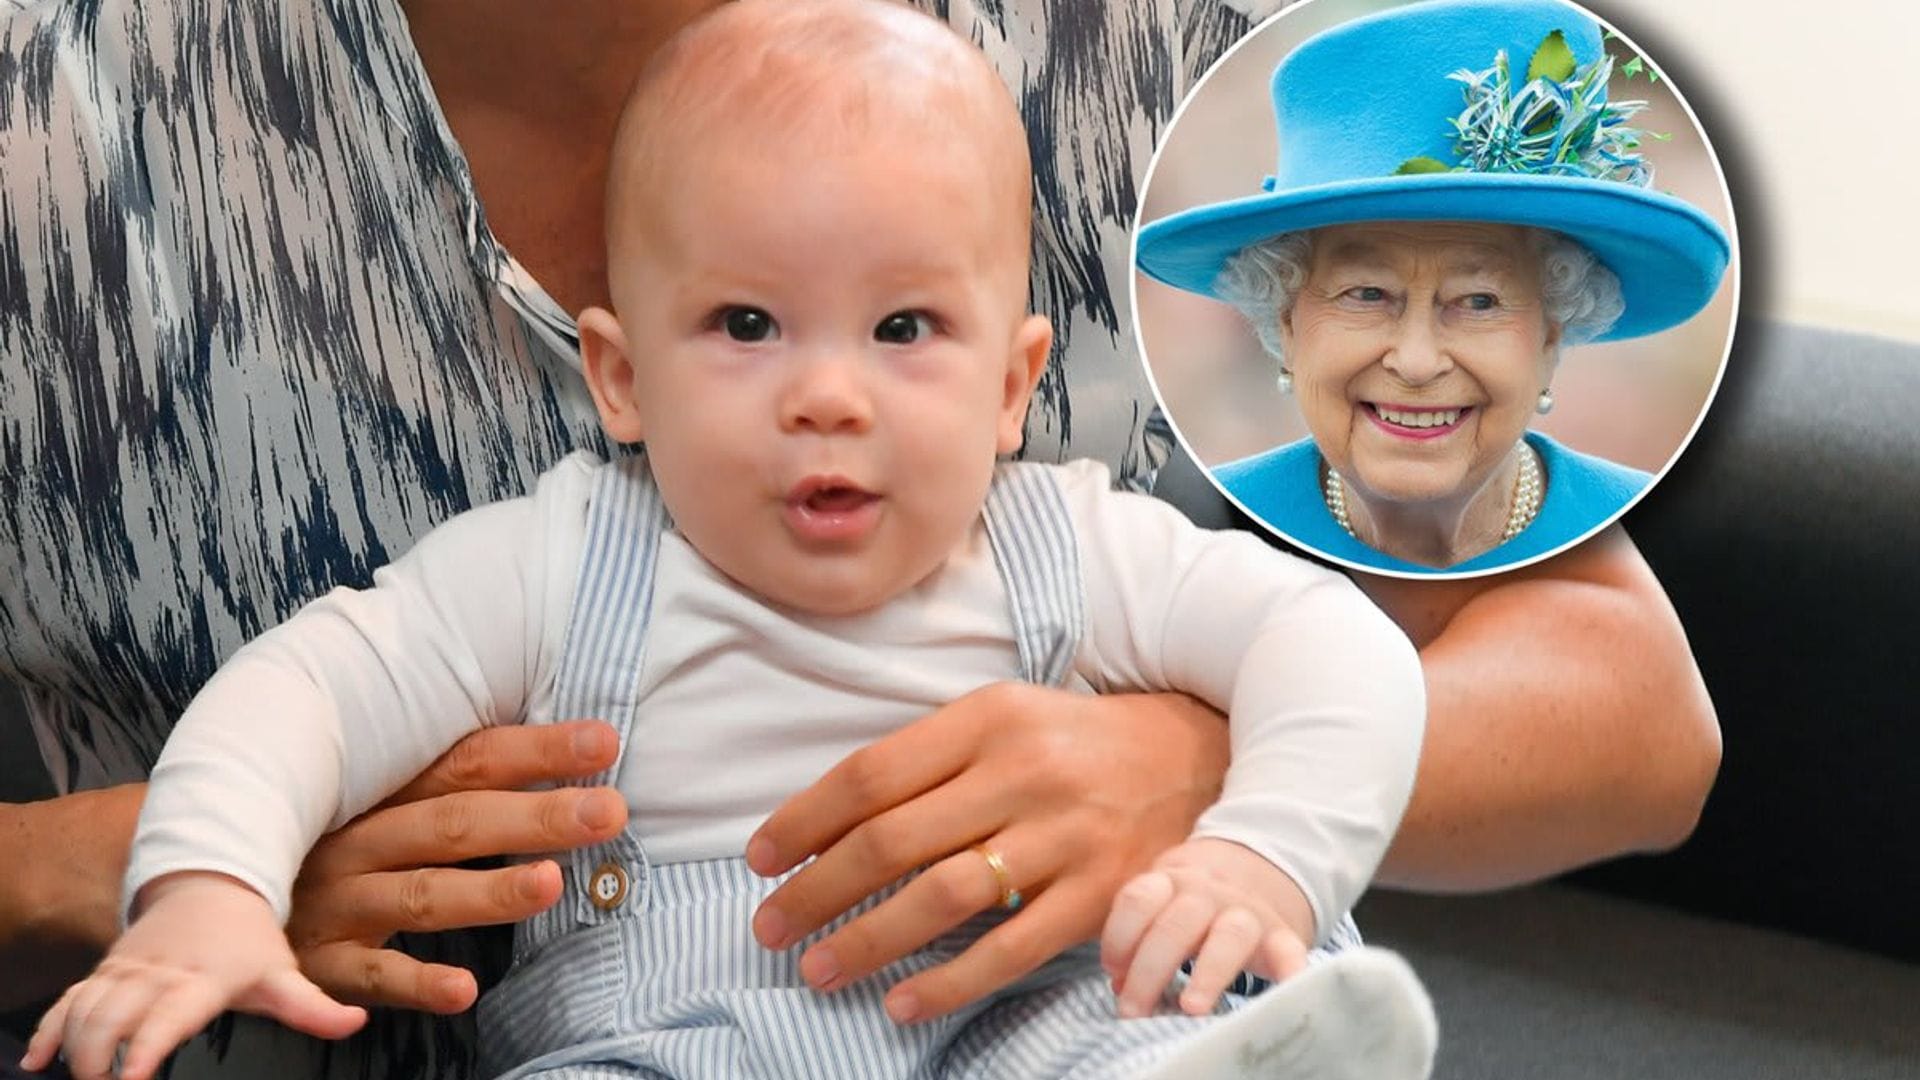 Queen Elizabeth's gift to great-grandson Archie Harrison revealed